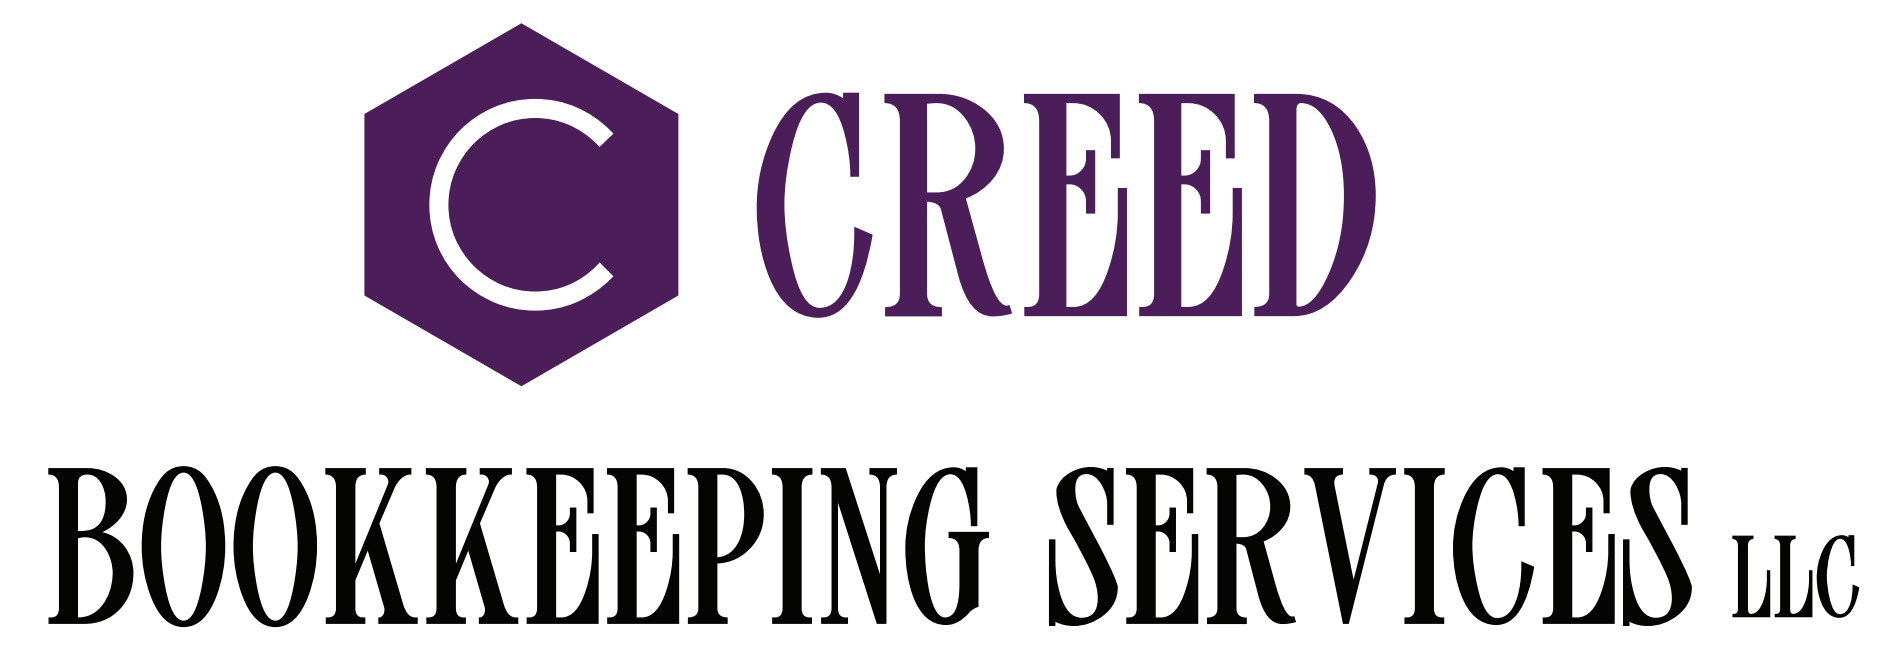 Creed Bookkeeping Services LLC